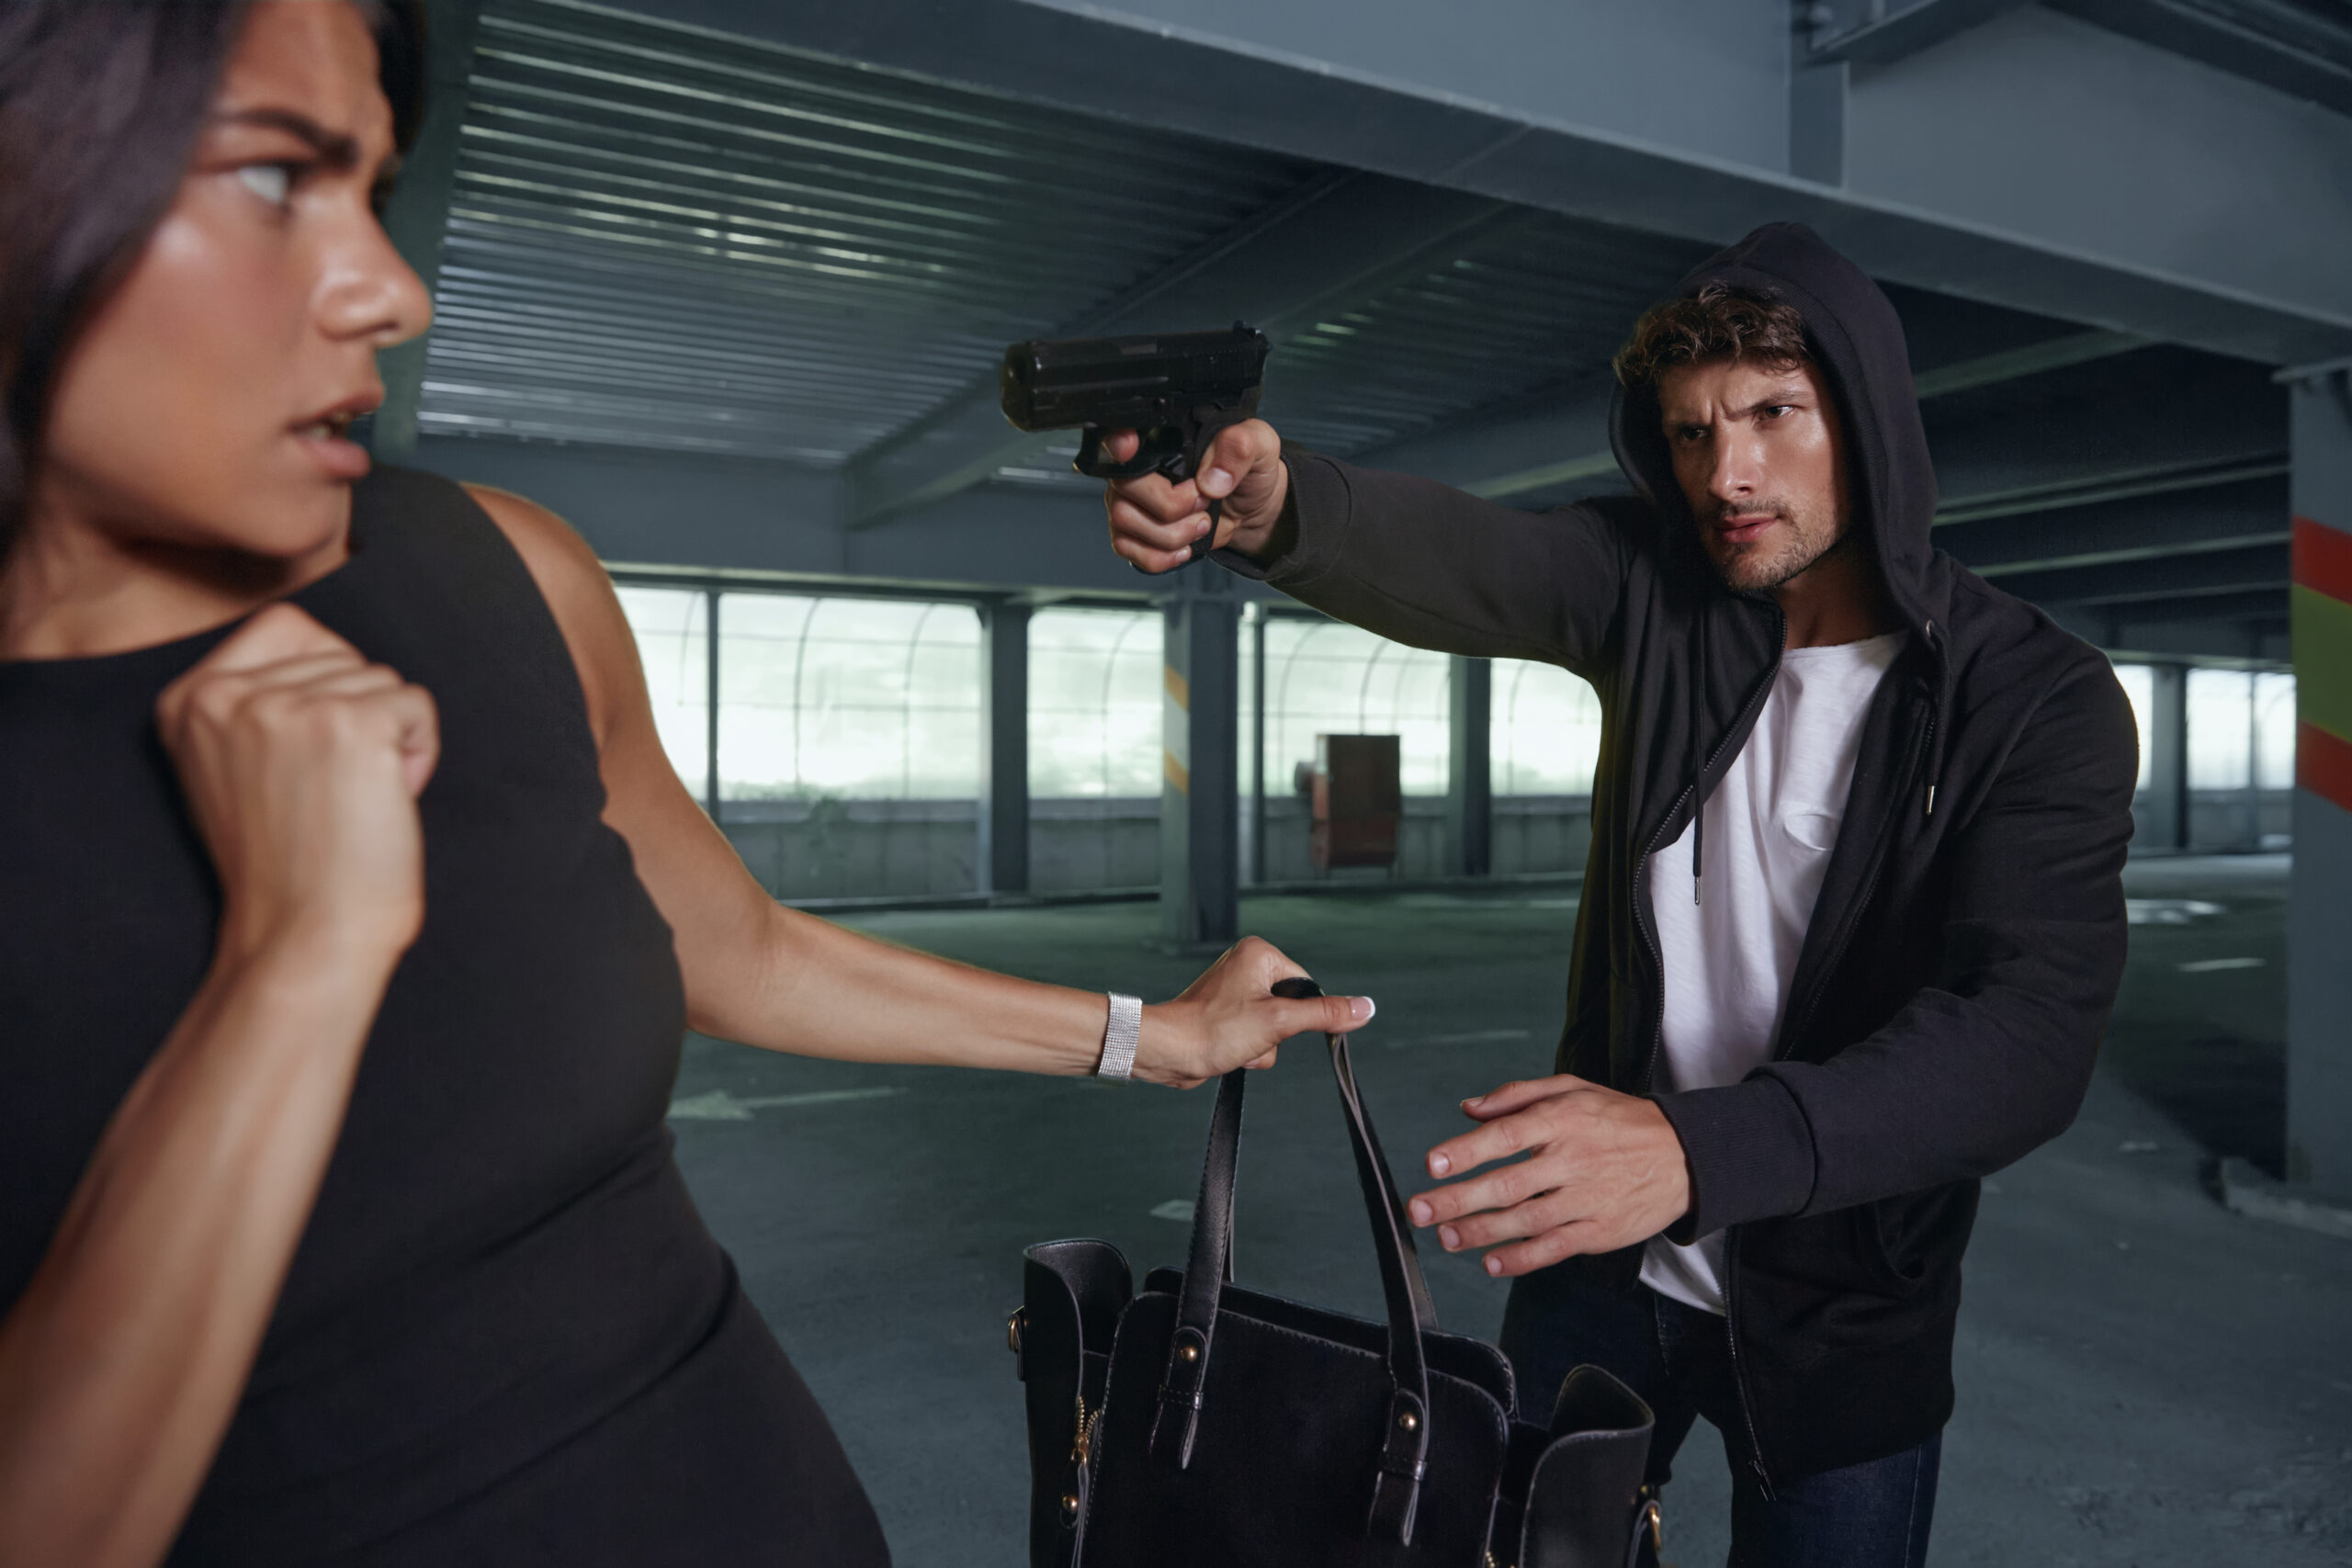 Angry robber want to steal handbag of frightened girl. Male bandit wear black hoodie and hold pistol. Young brunette woman wear black dress. Concept of robbery. Inside parking lot